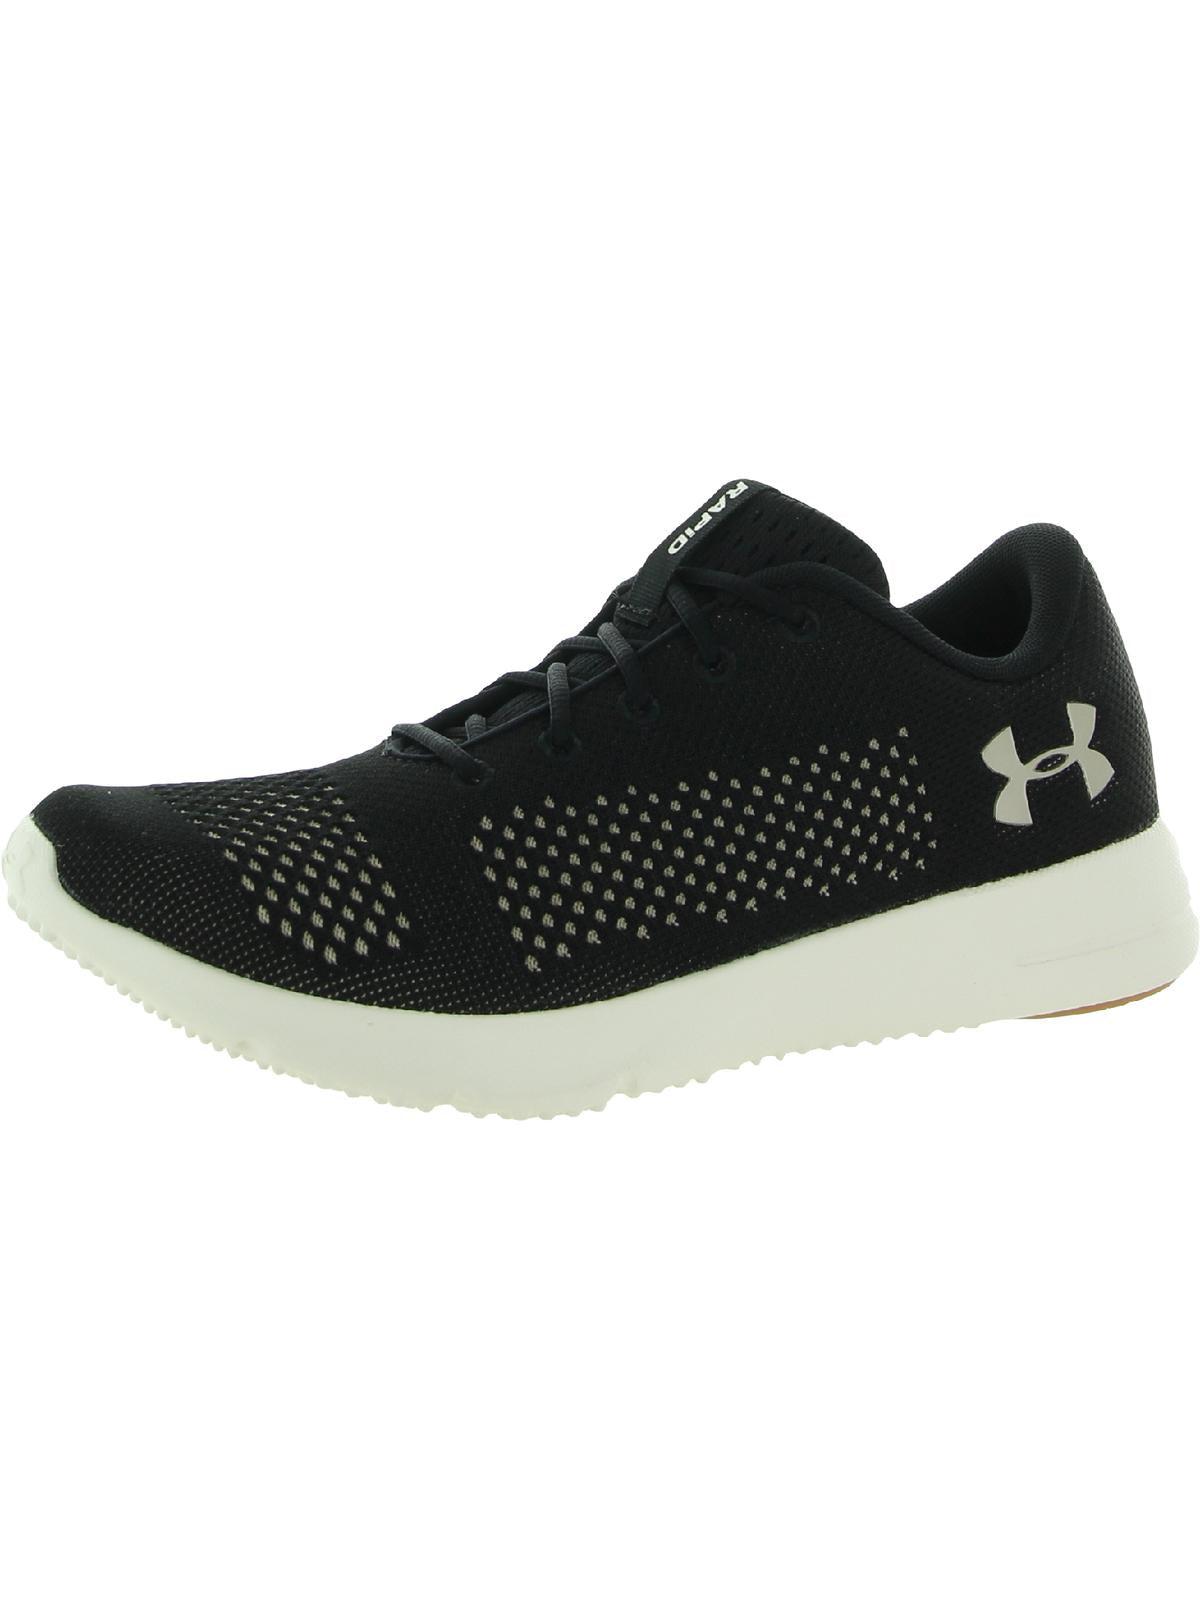 Under Armour Rapid Lightweight Flexible Running Shoes in Black | Lyst